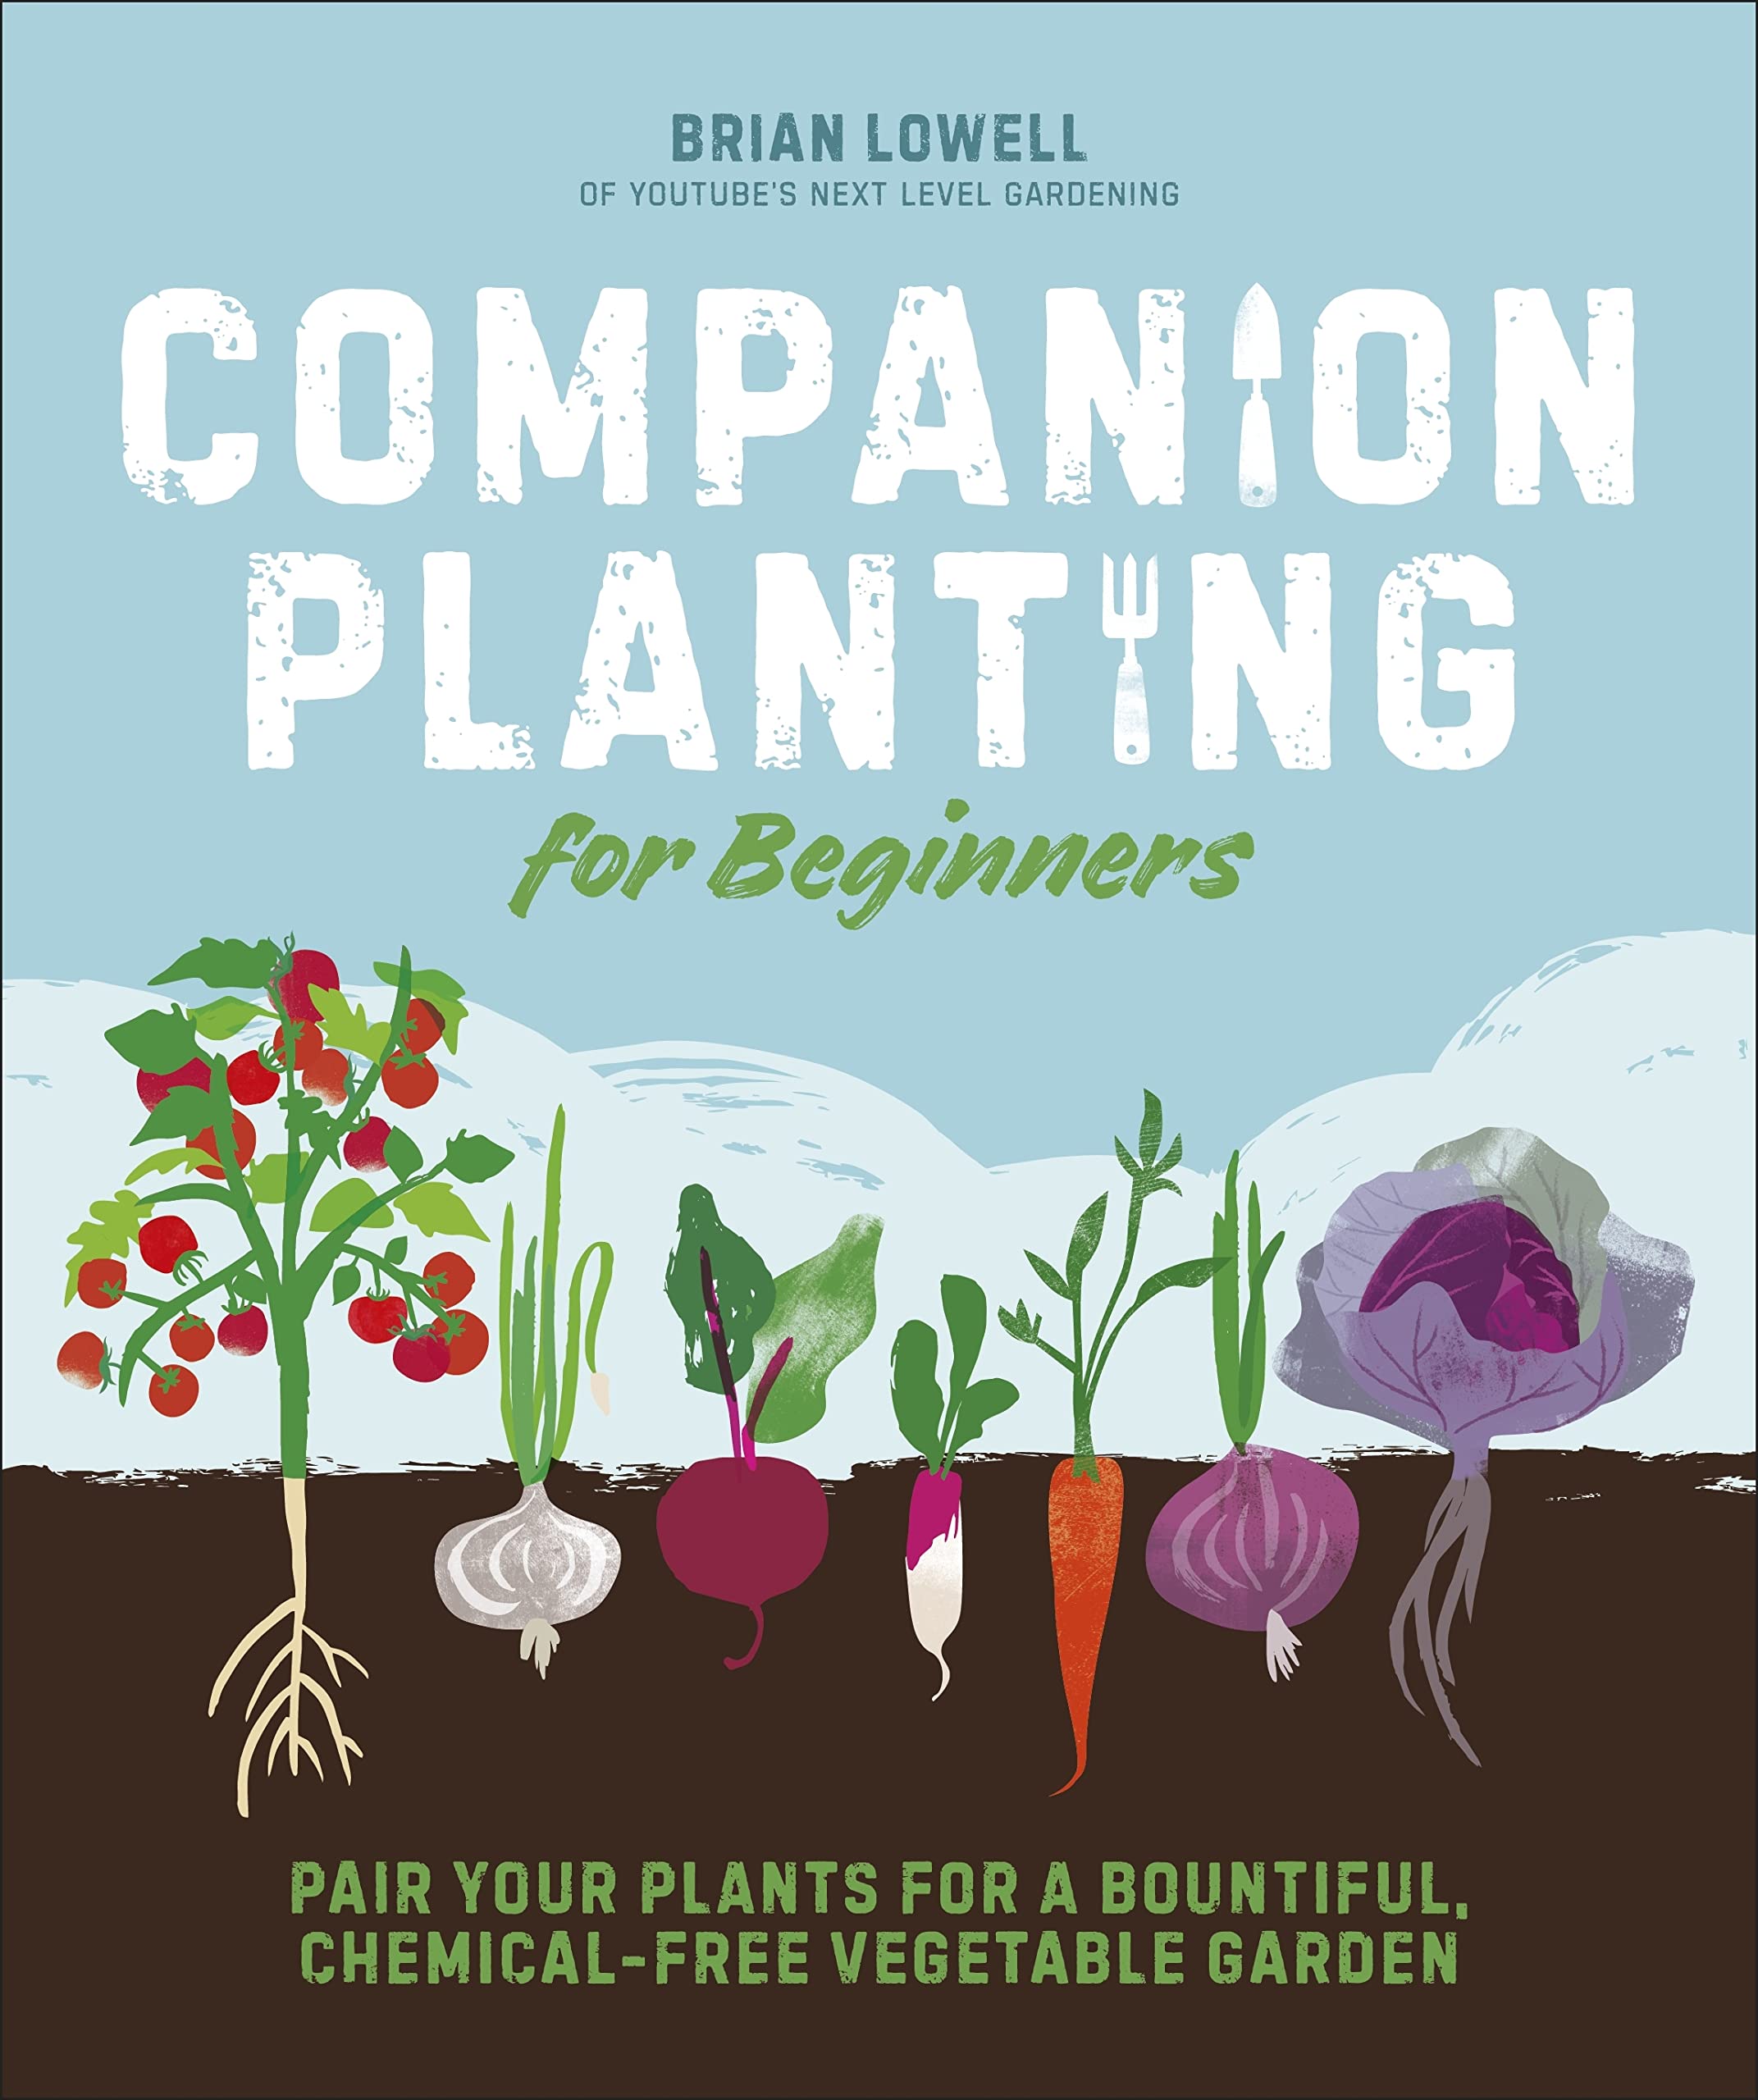 Companion Planting for Beginners